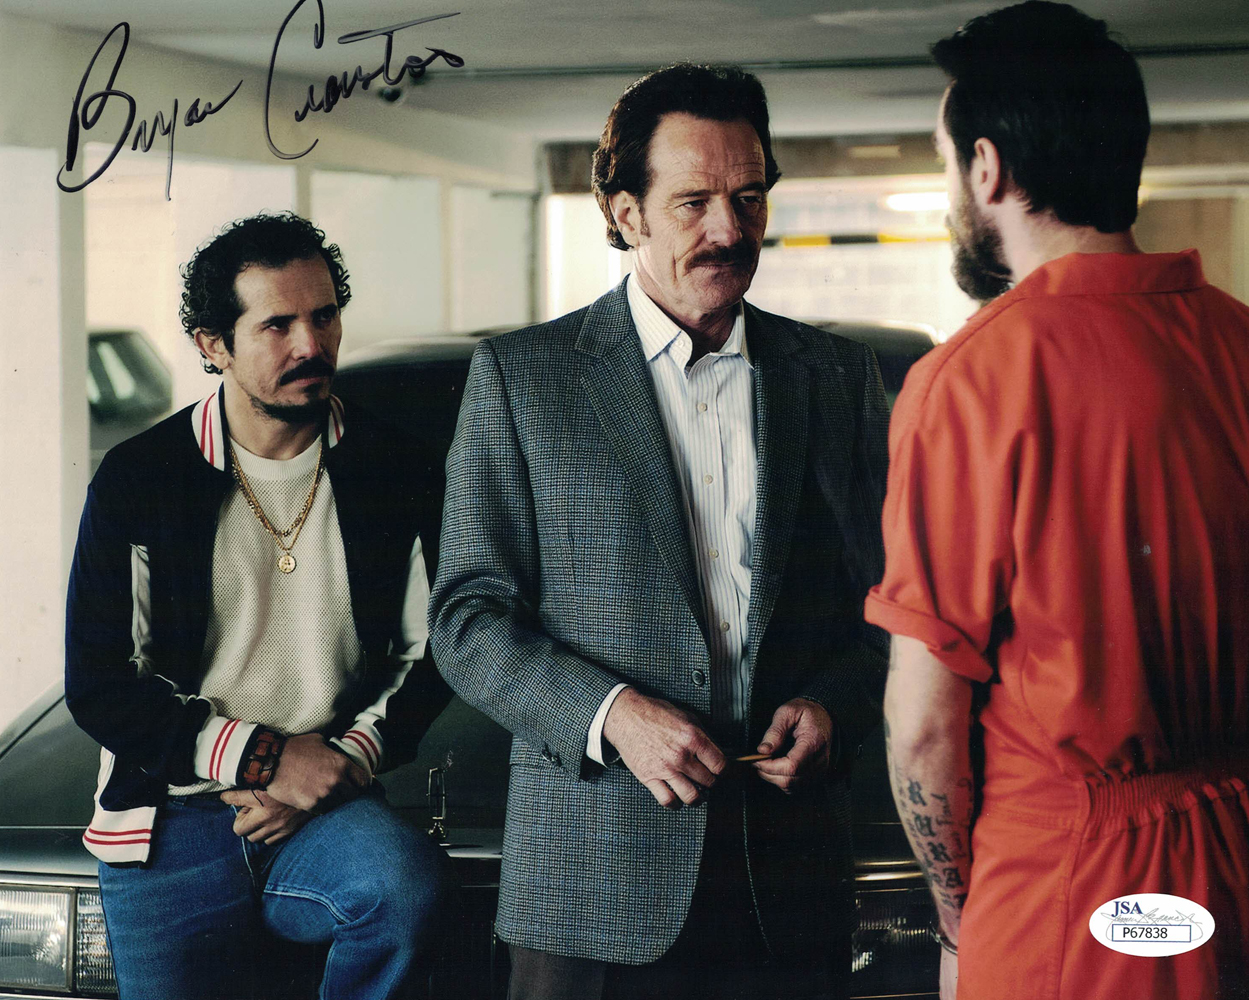 Bryan Cranston Autographed/Signed The Infiltrator 8x10 Photo JSA 30265